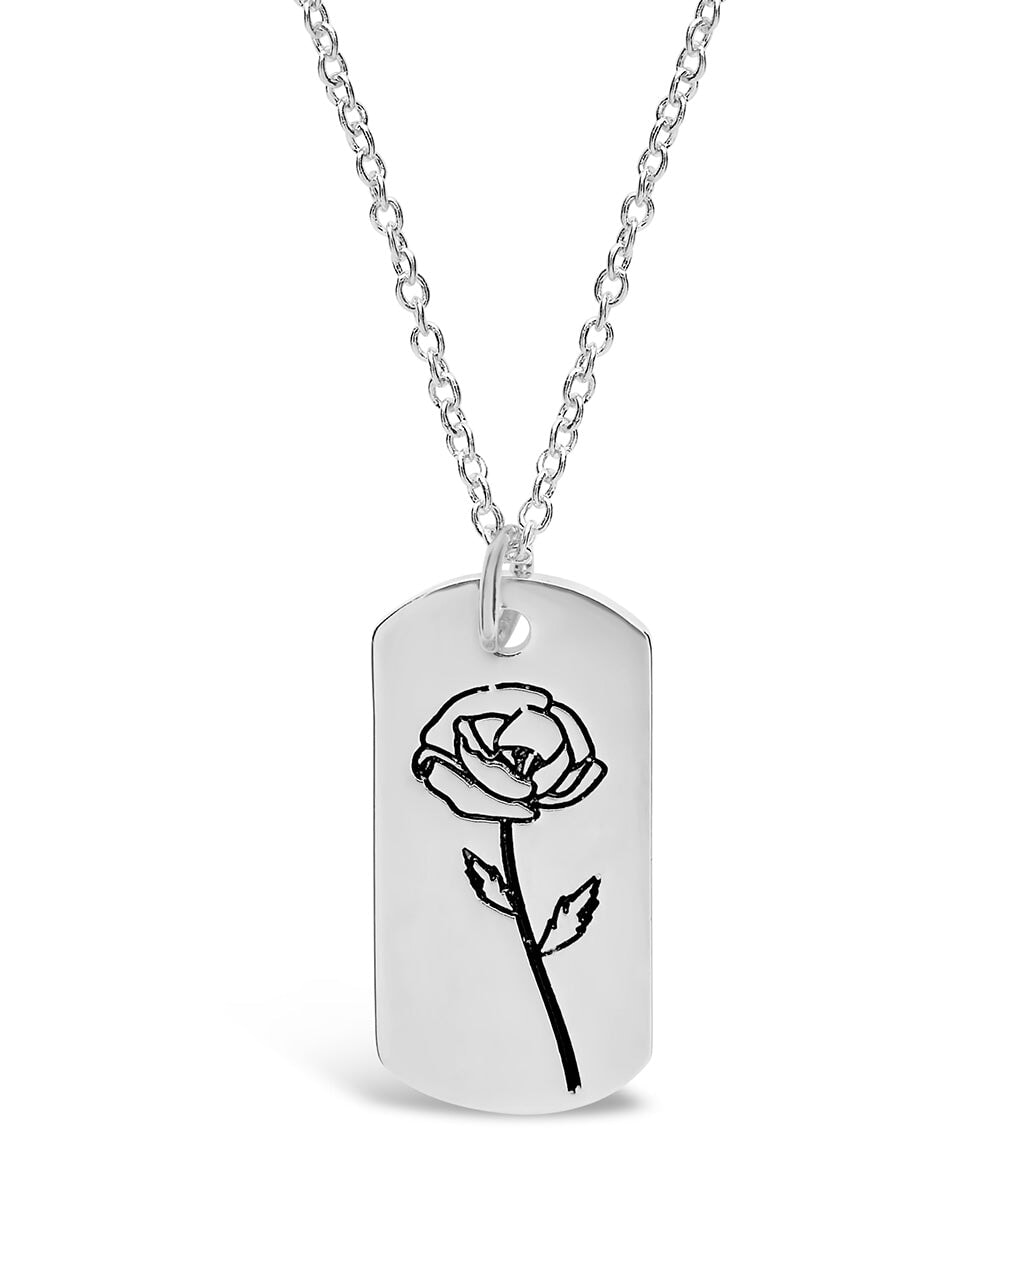 Birth Flower Pendant Necklace Sterling Forever Silver August / Poppy 